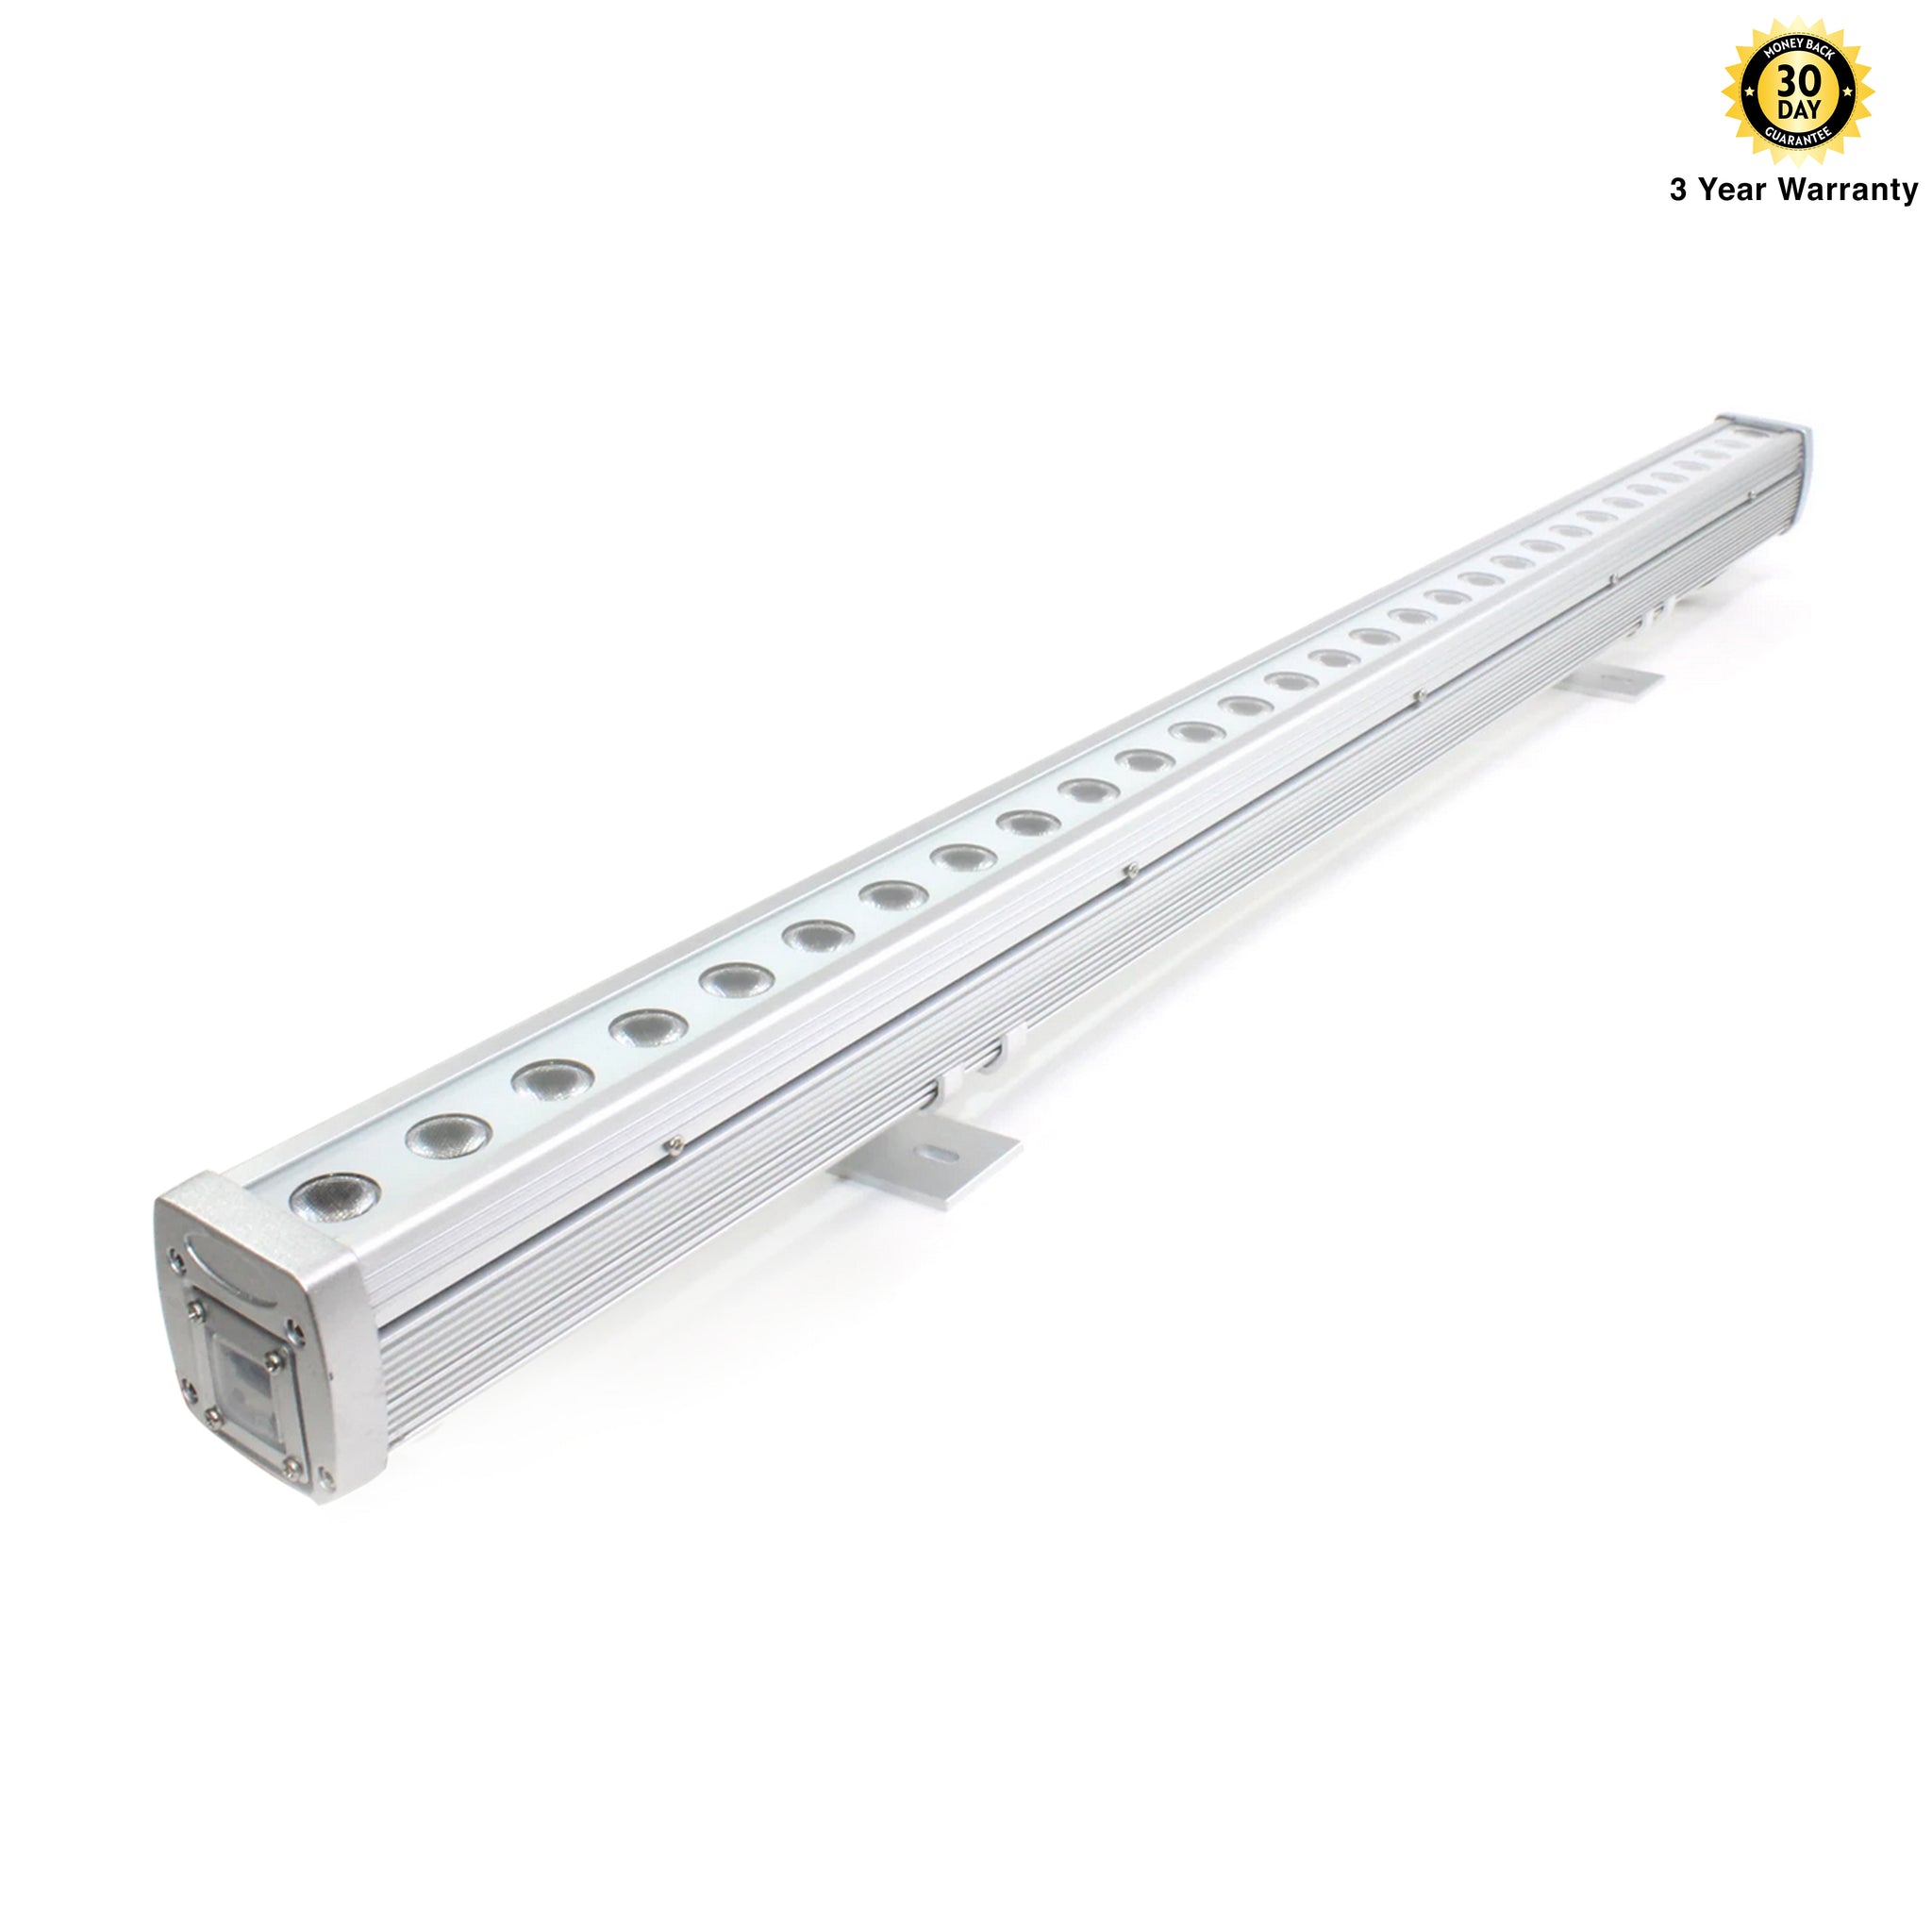 RGB/DMX LINEAR WALL WASHER PaylessLEDS